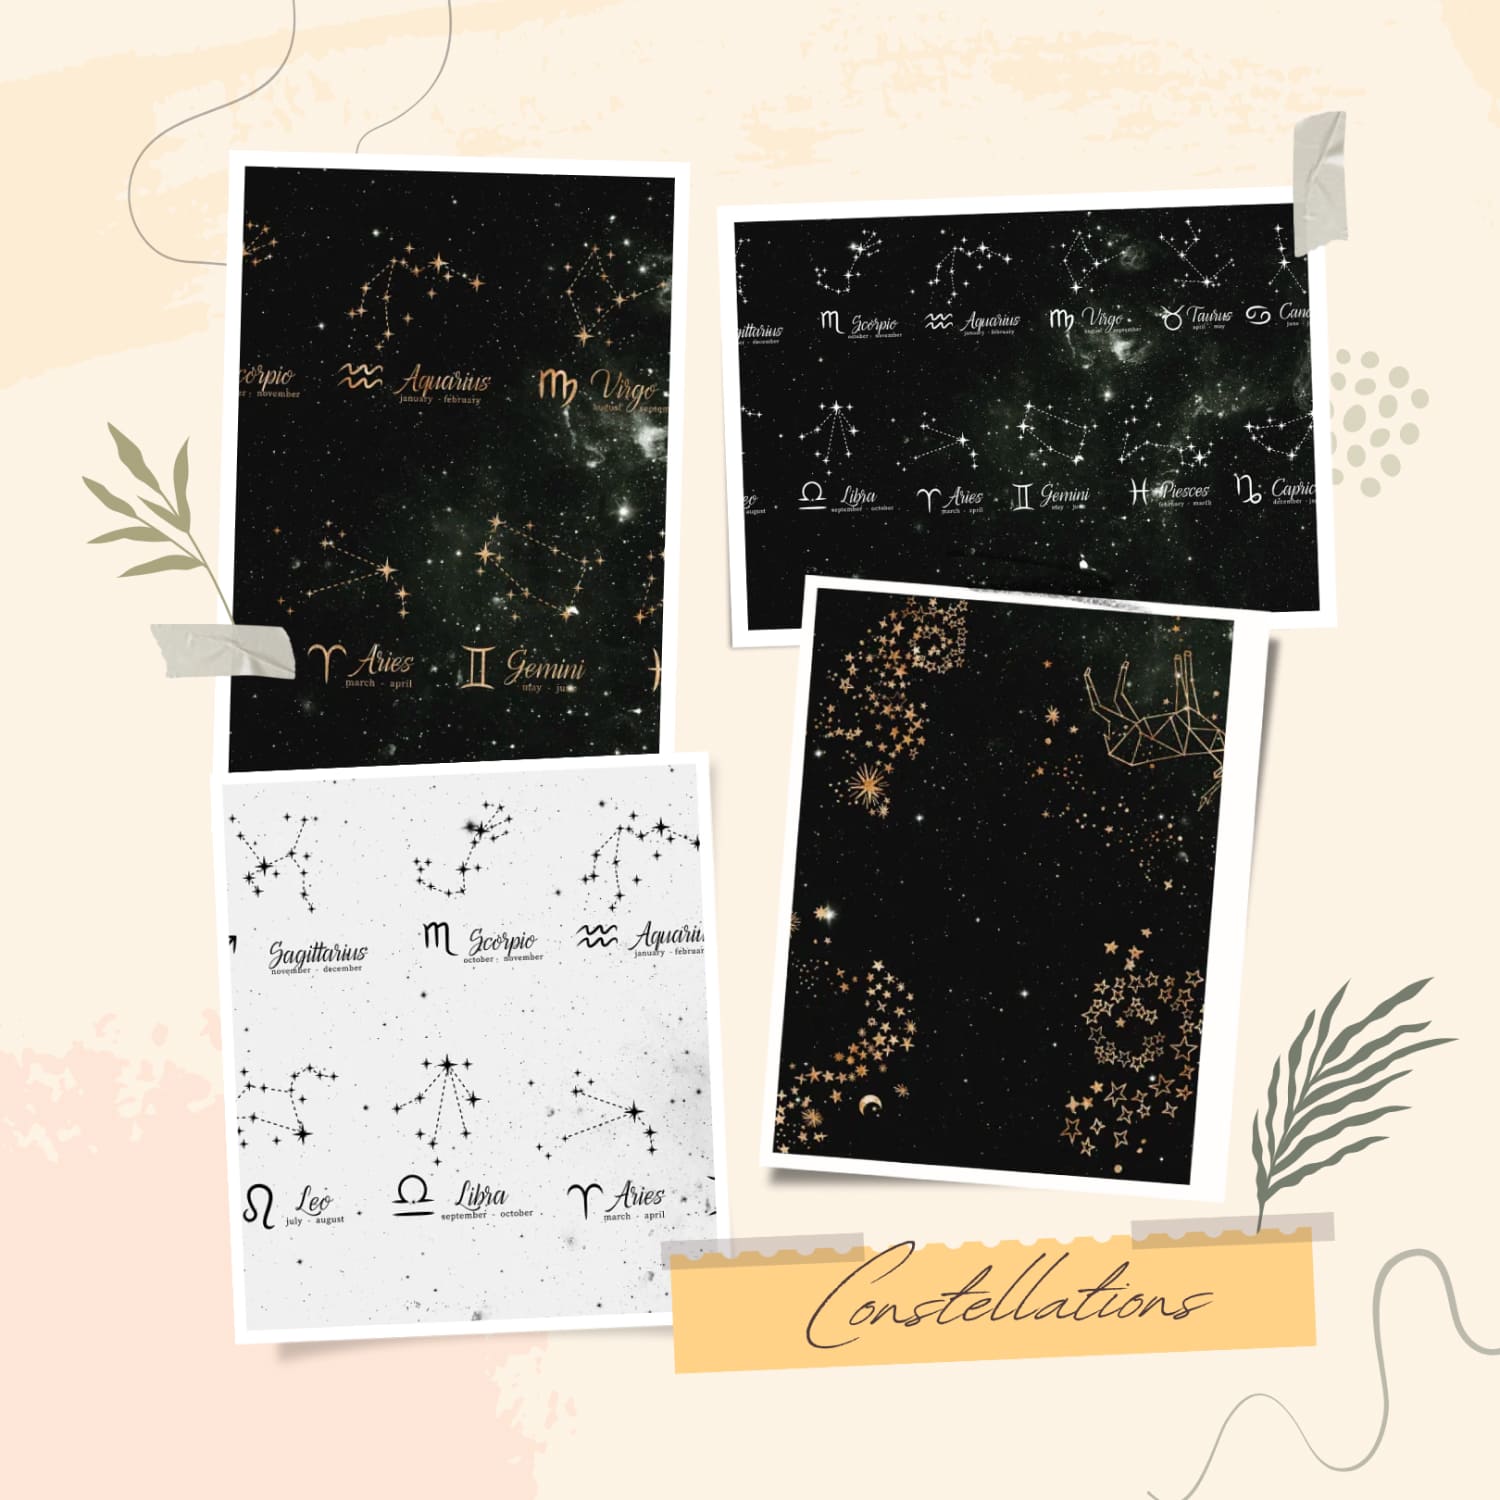 Three black and one white drawings of the constellations.